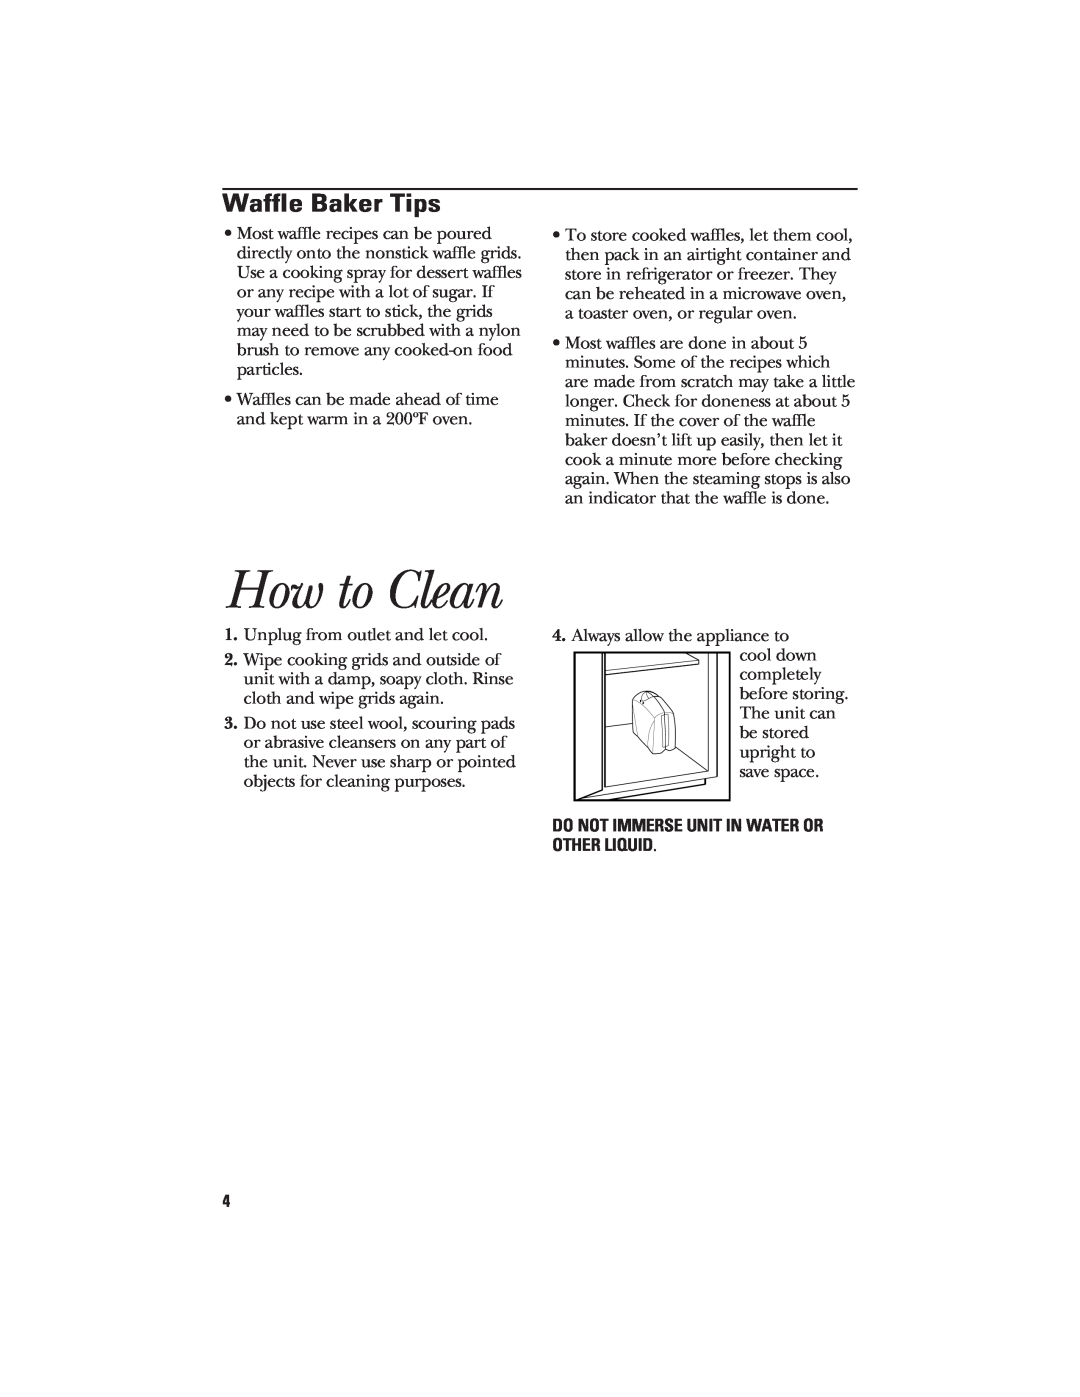 GE 840085600 manual How to Clean, Waffle Baker Tips 